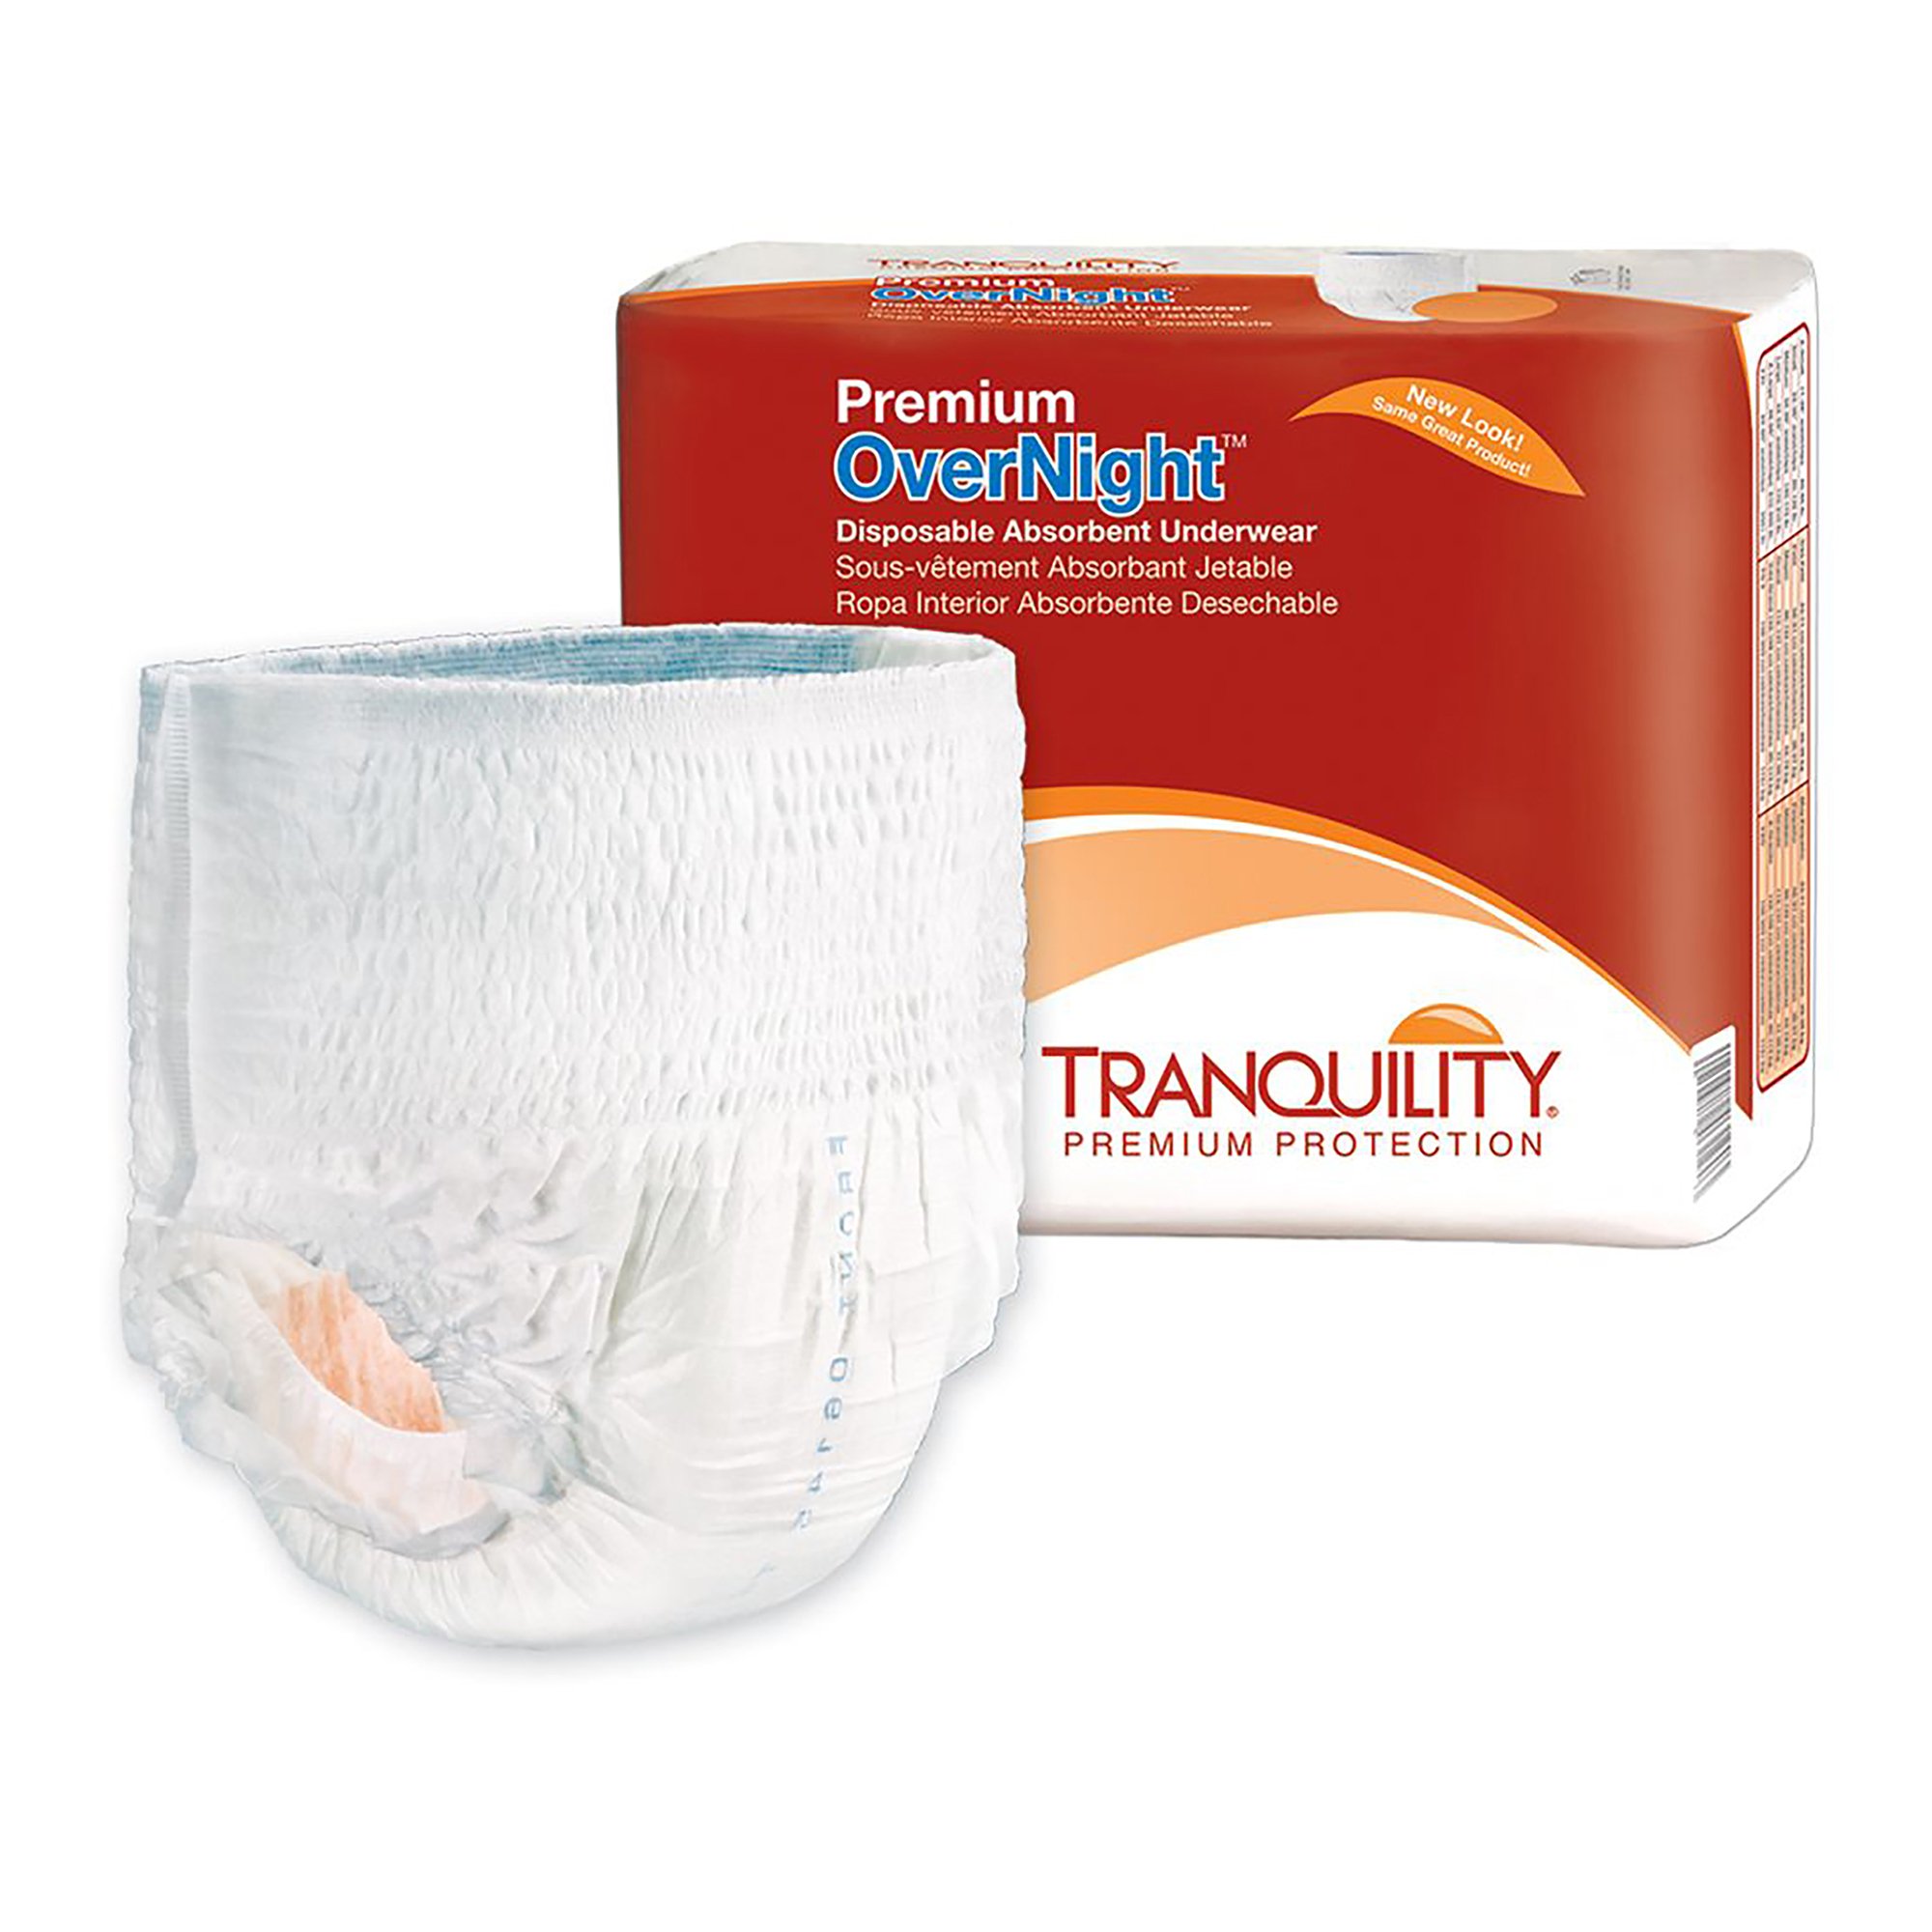 Tranquility Premium OverNight Maximum Protection Absorbent Underwear, Extra Small